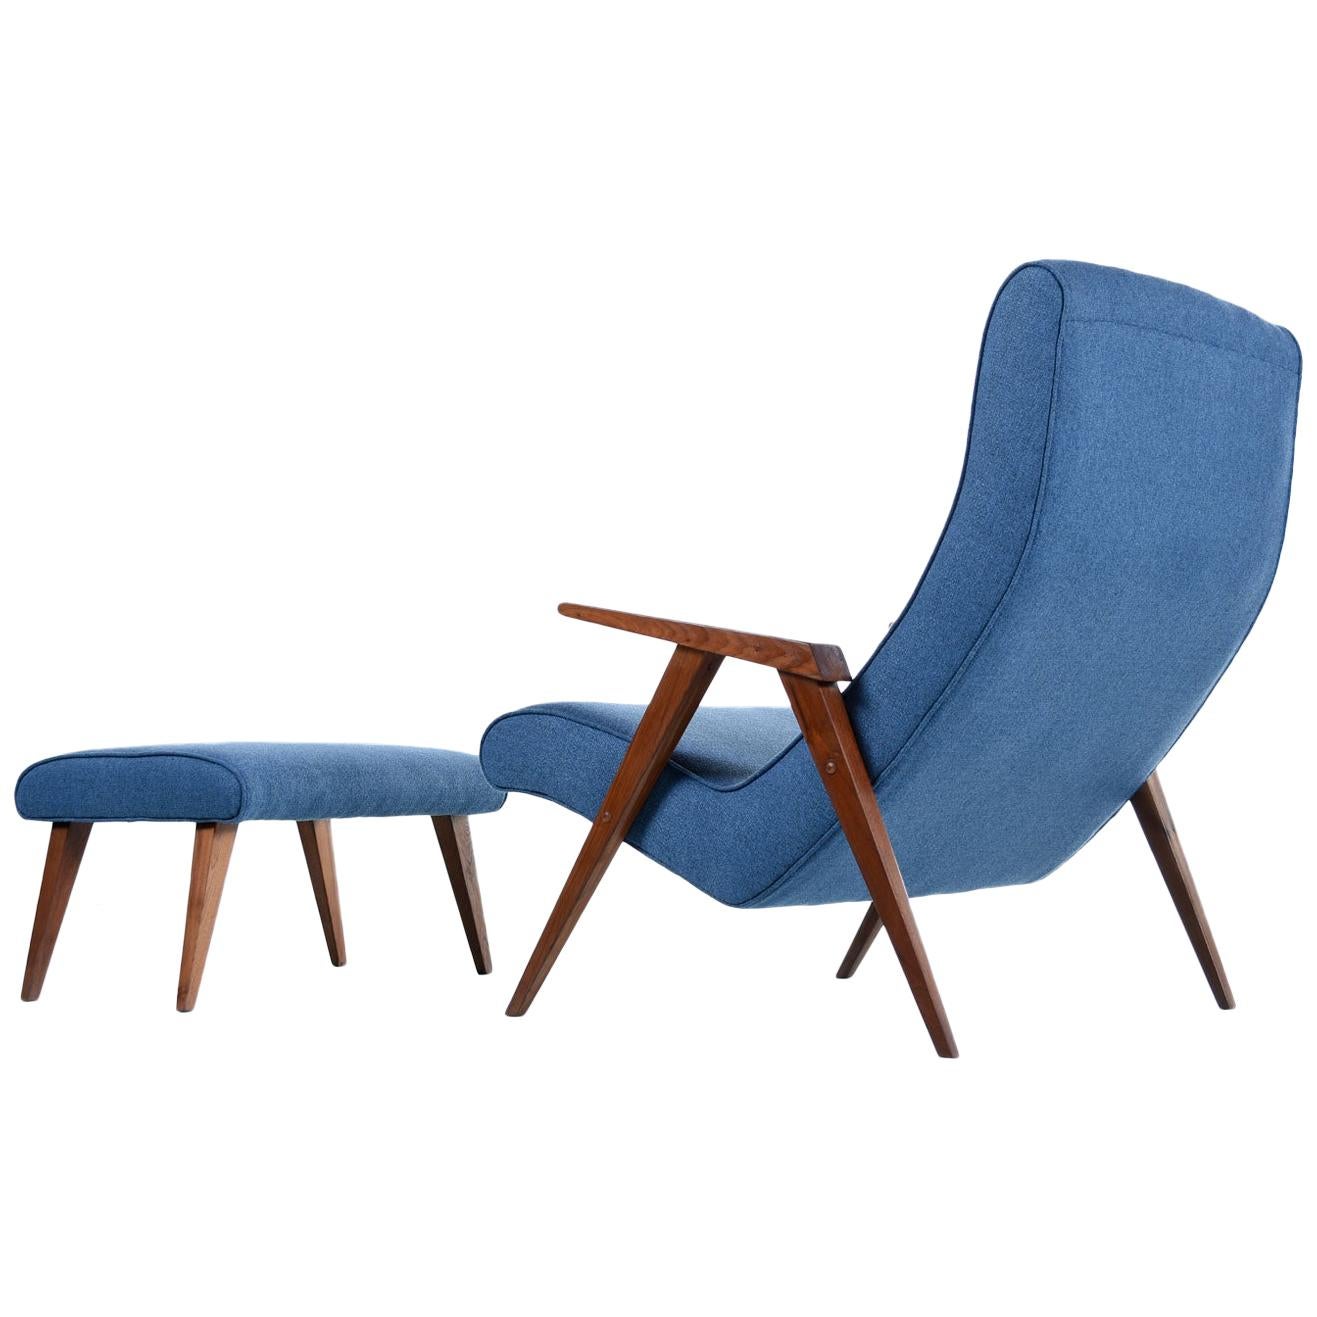 Restored Jens Risom Style Compass Leg Scoop Lounge Armchair and Ottoman, 1950s